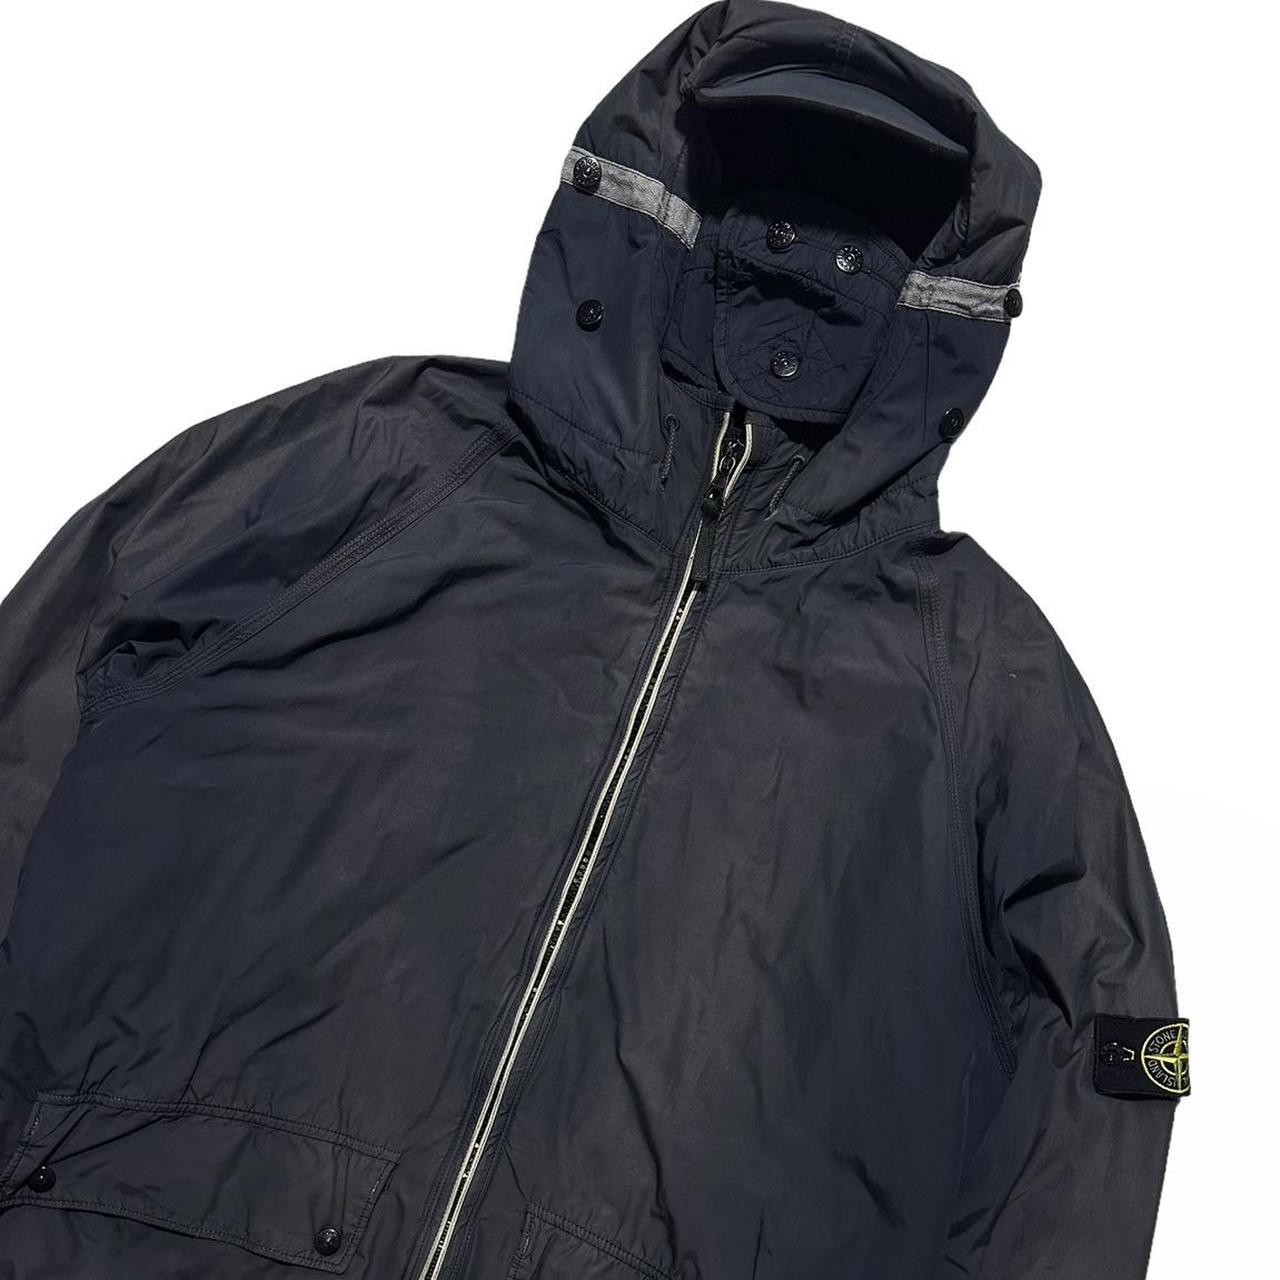 Stone Island Riot Mask Jacket - Known Source